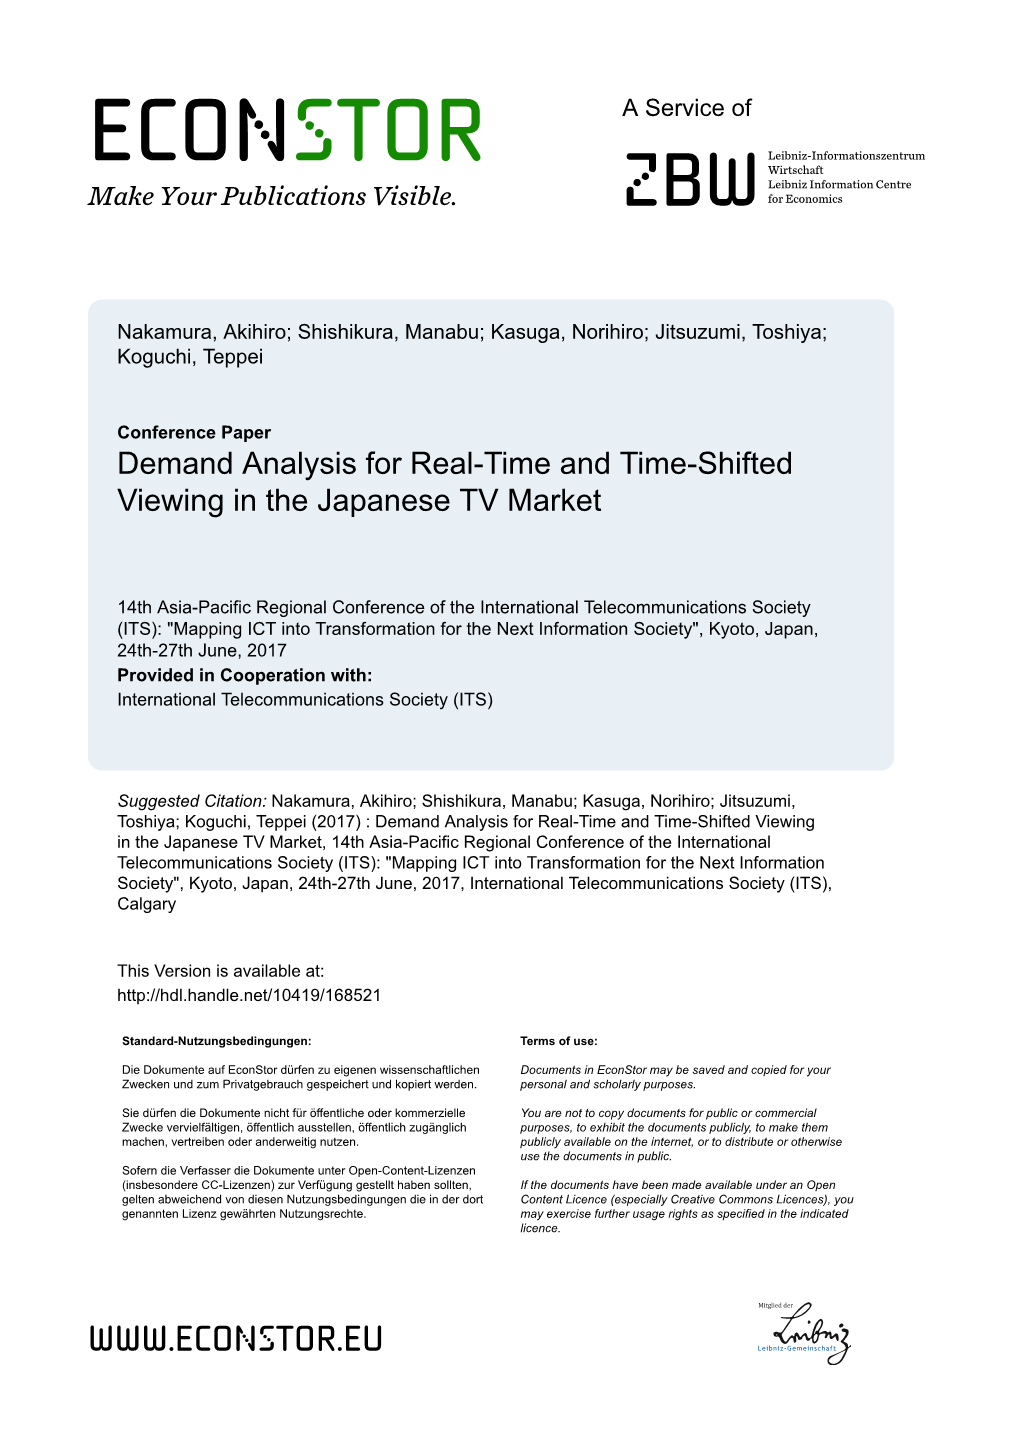 Demand Analysis for Real-Time and Time-Shifted Viewing in the Japanese TV Market